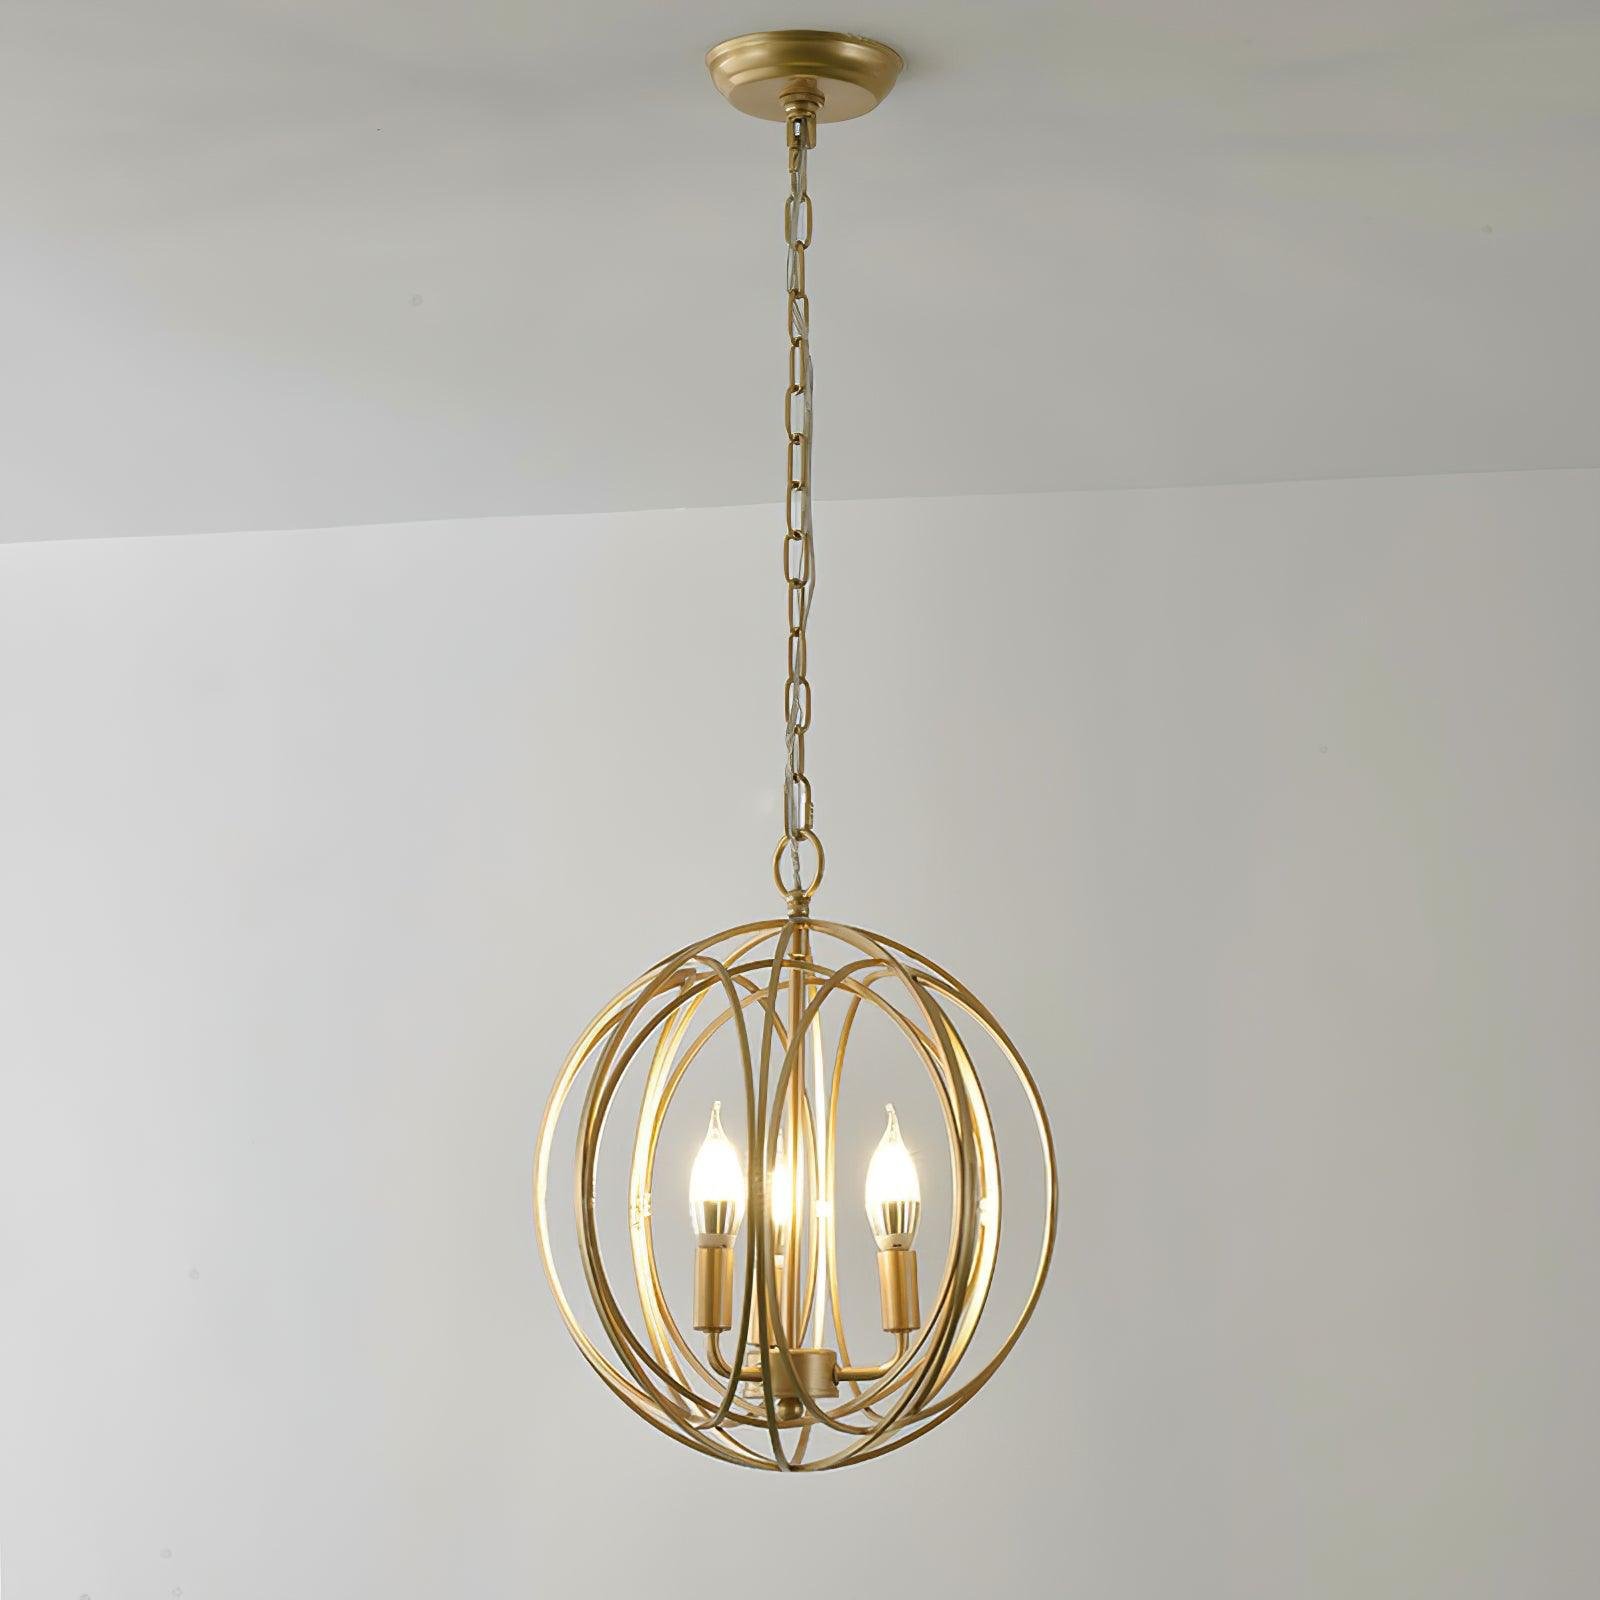 Gold Ofelia Pendant Light with 3 Heads, measuring 13.6" in diameter and 13.8" in height (34.5cm x 35cm)